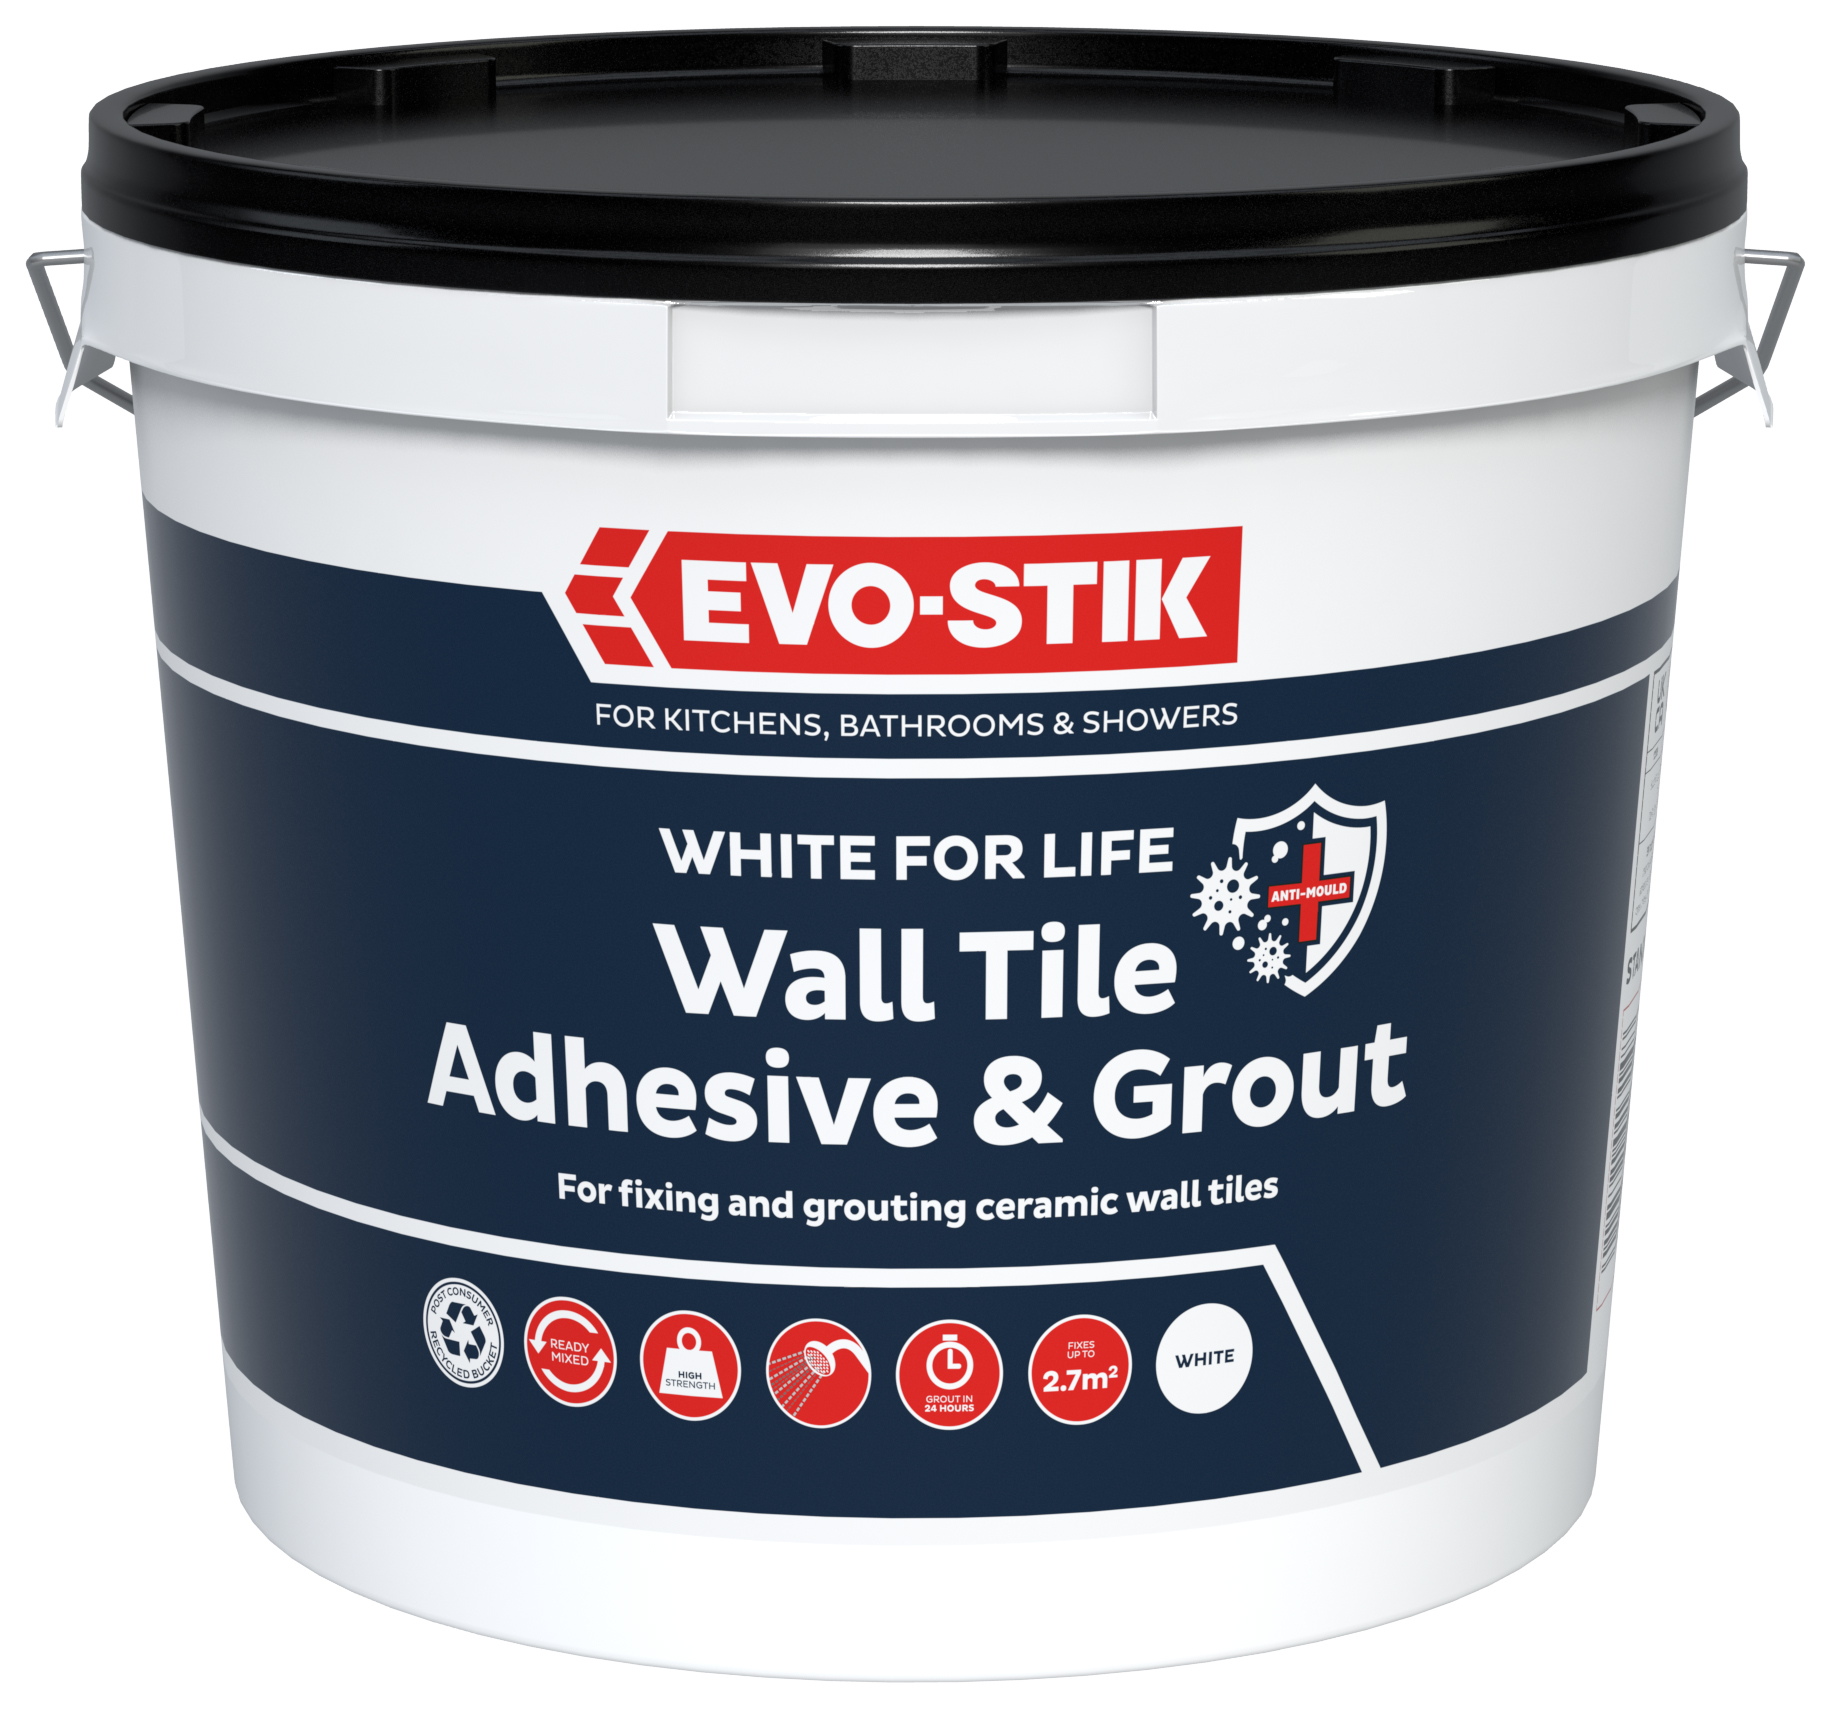 Image of EVO-STIK 2.5L White for Life Wall Tile Adhesive & Grout - White